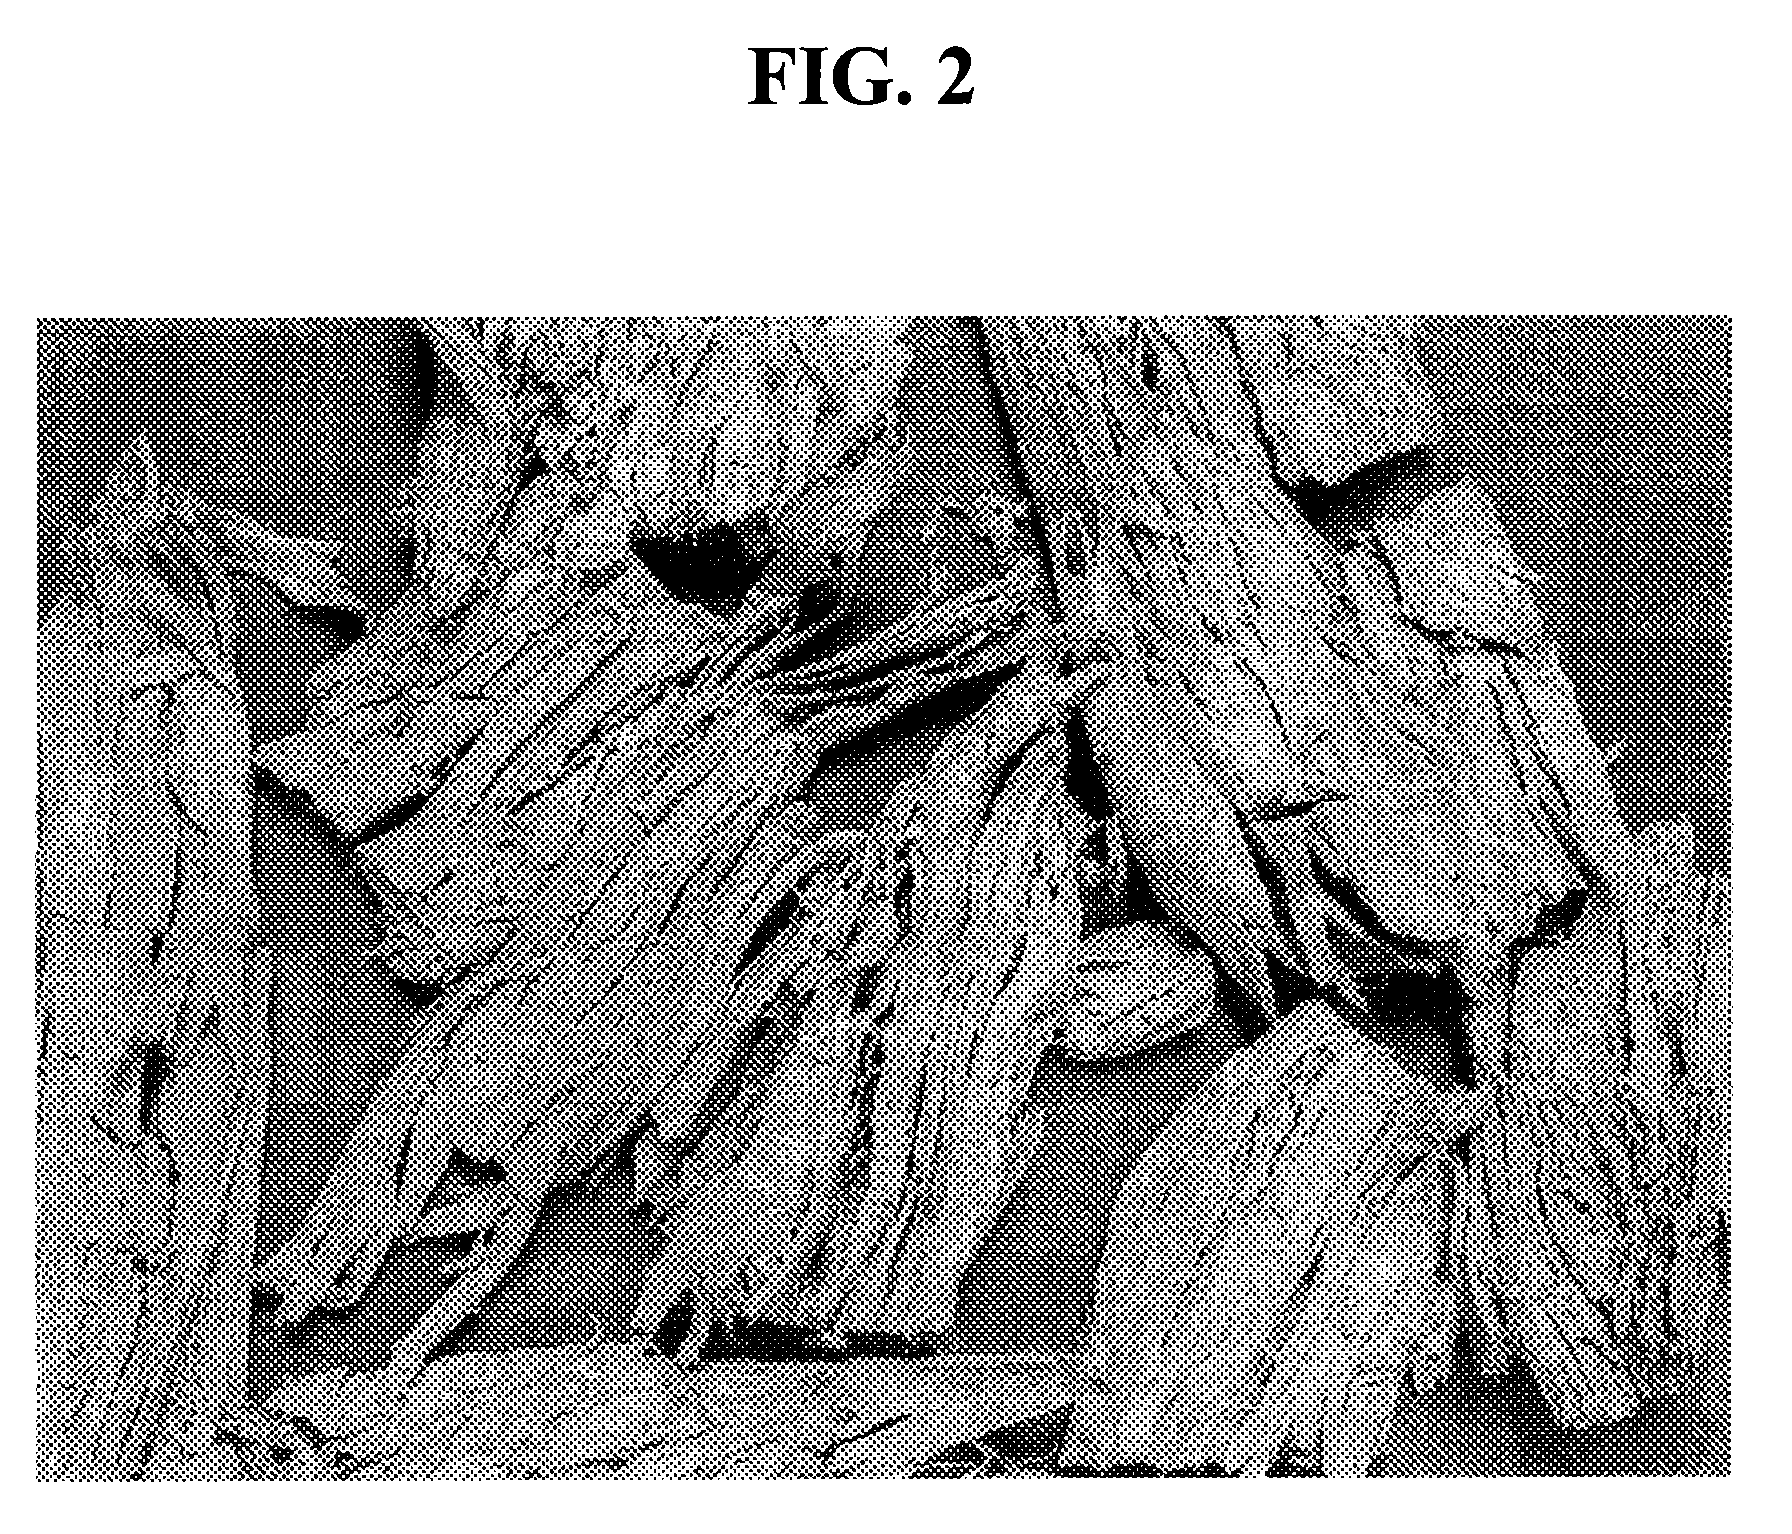 Meat emulsion products and methods of making same